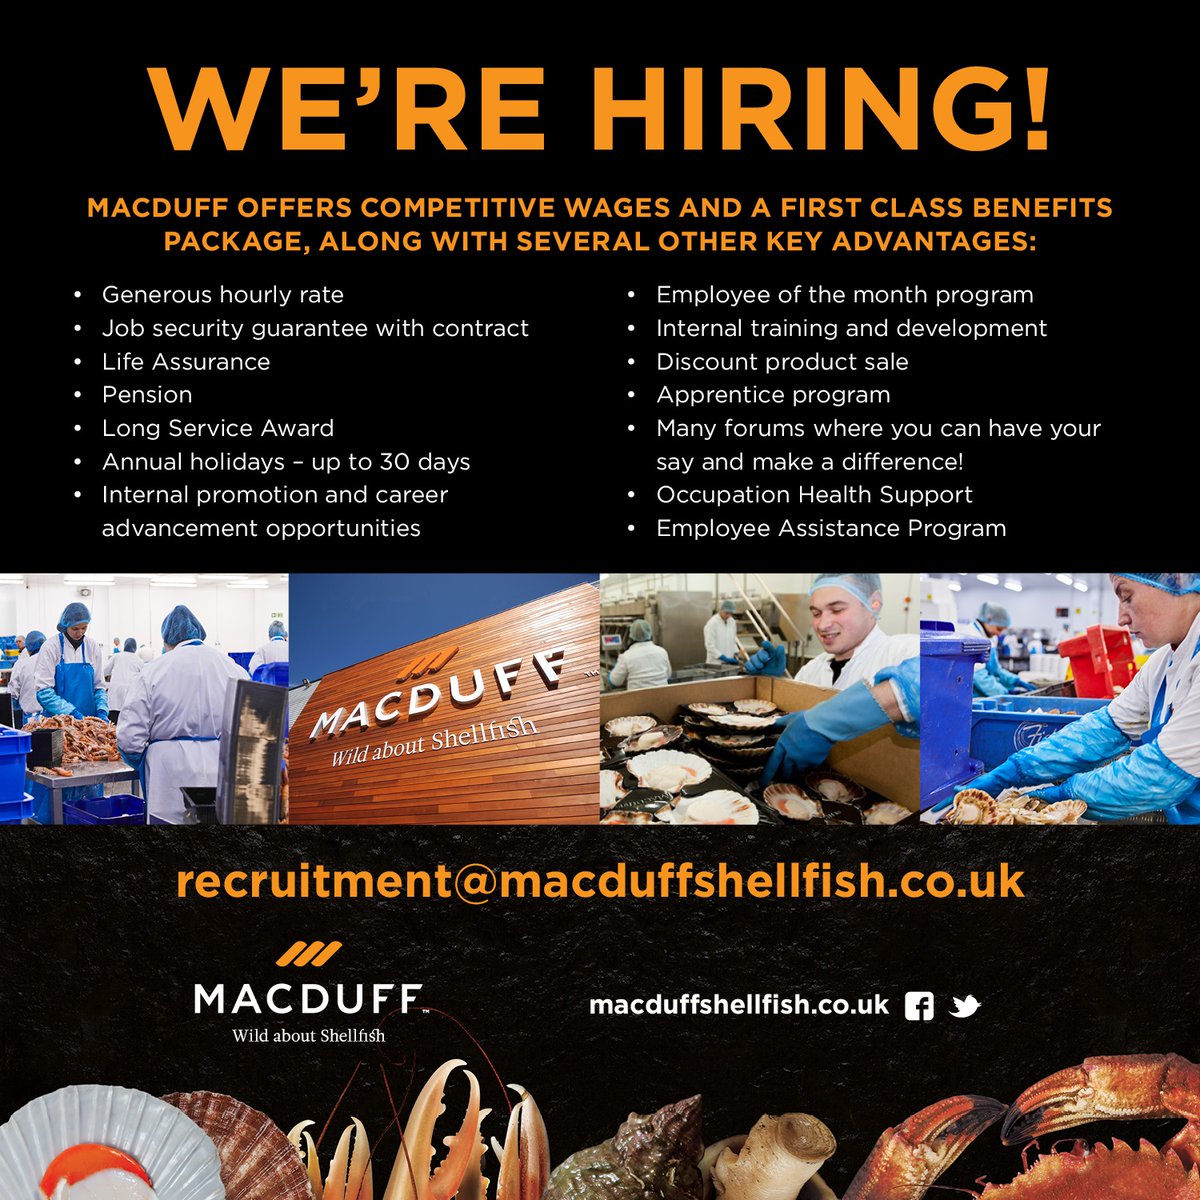 We're hiring! As Macduff continues to grow, we are recruiting for General Operative positions at our Mintlaw and Stornoway processing facilities in Scotland.